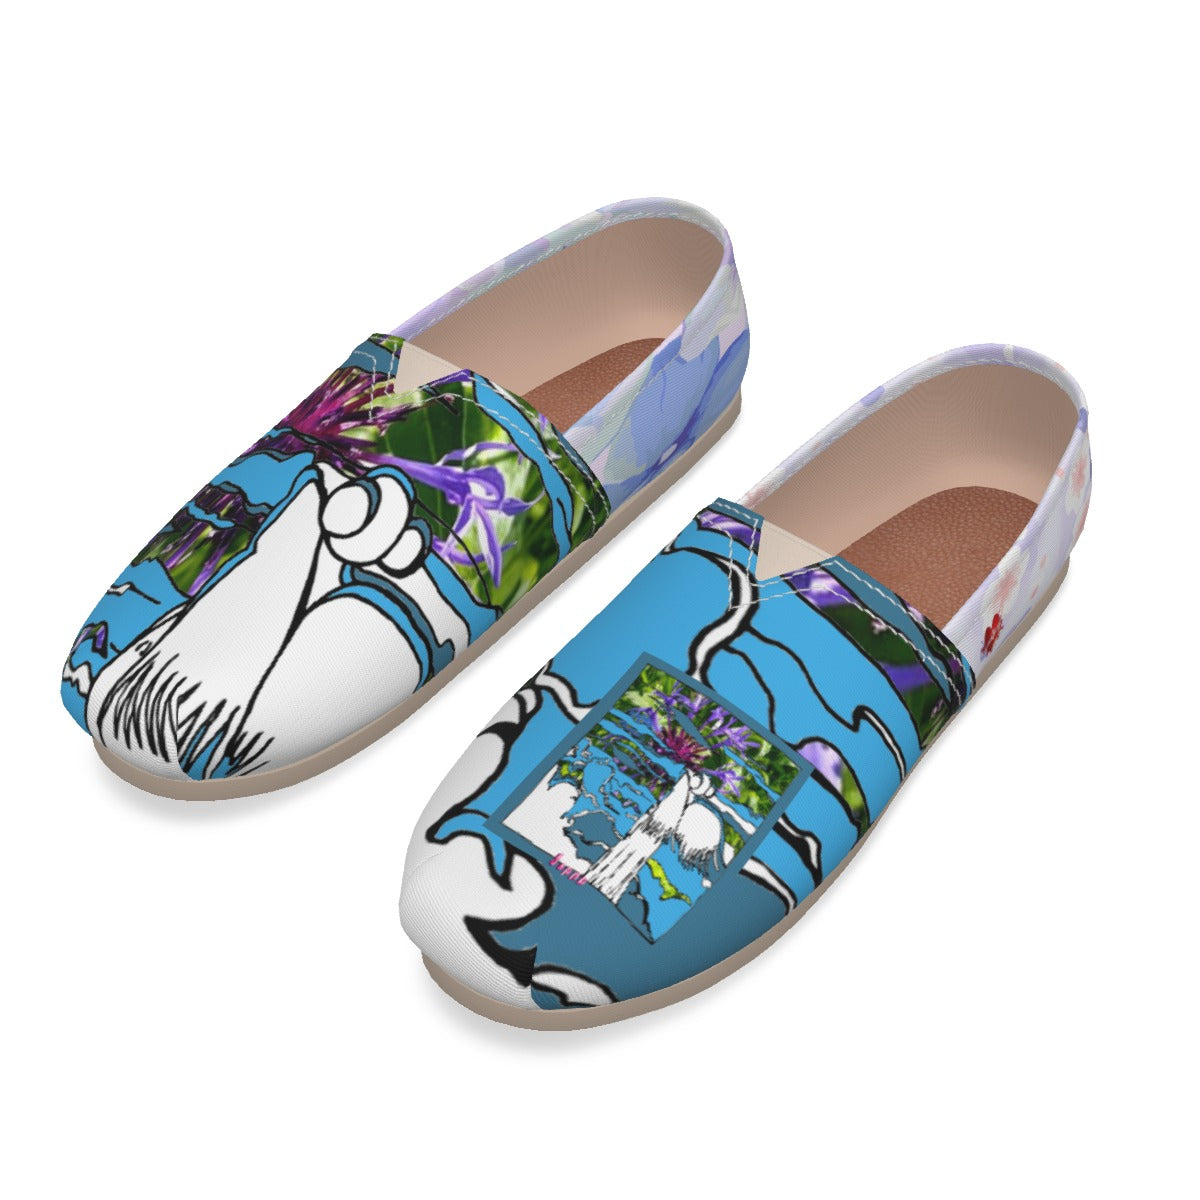 ANGEL-All-Over Print Women's Canvas Fisherman Shoes